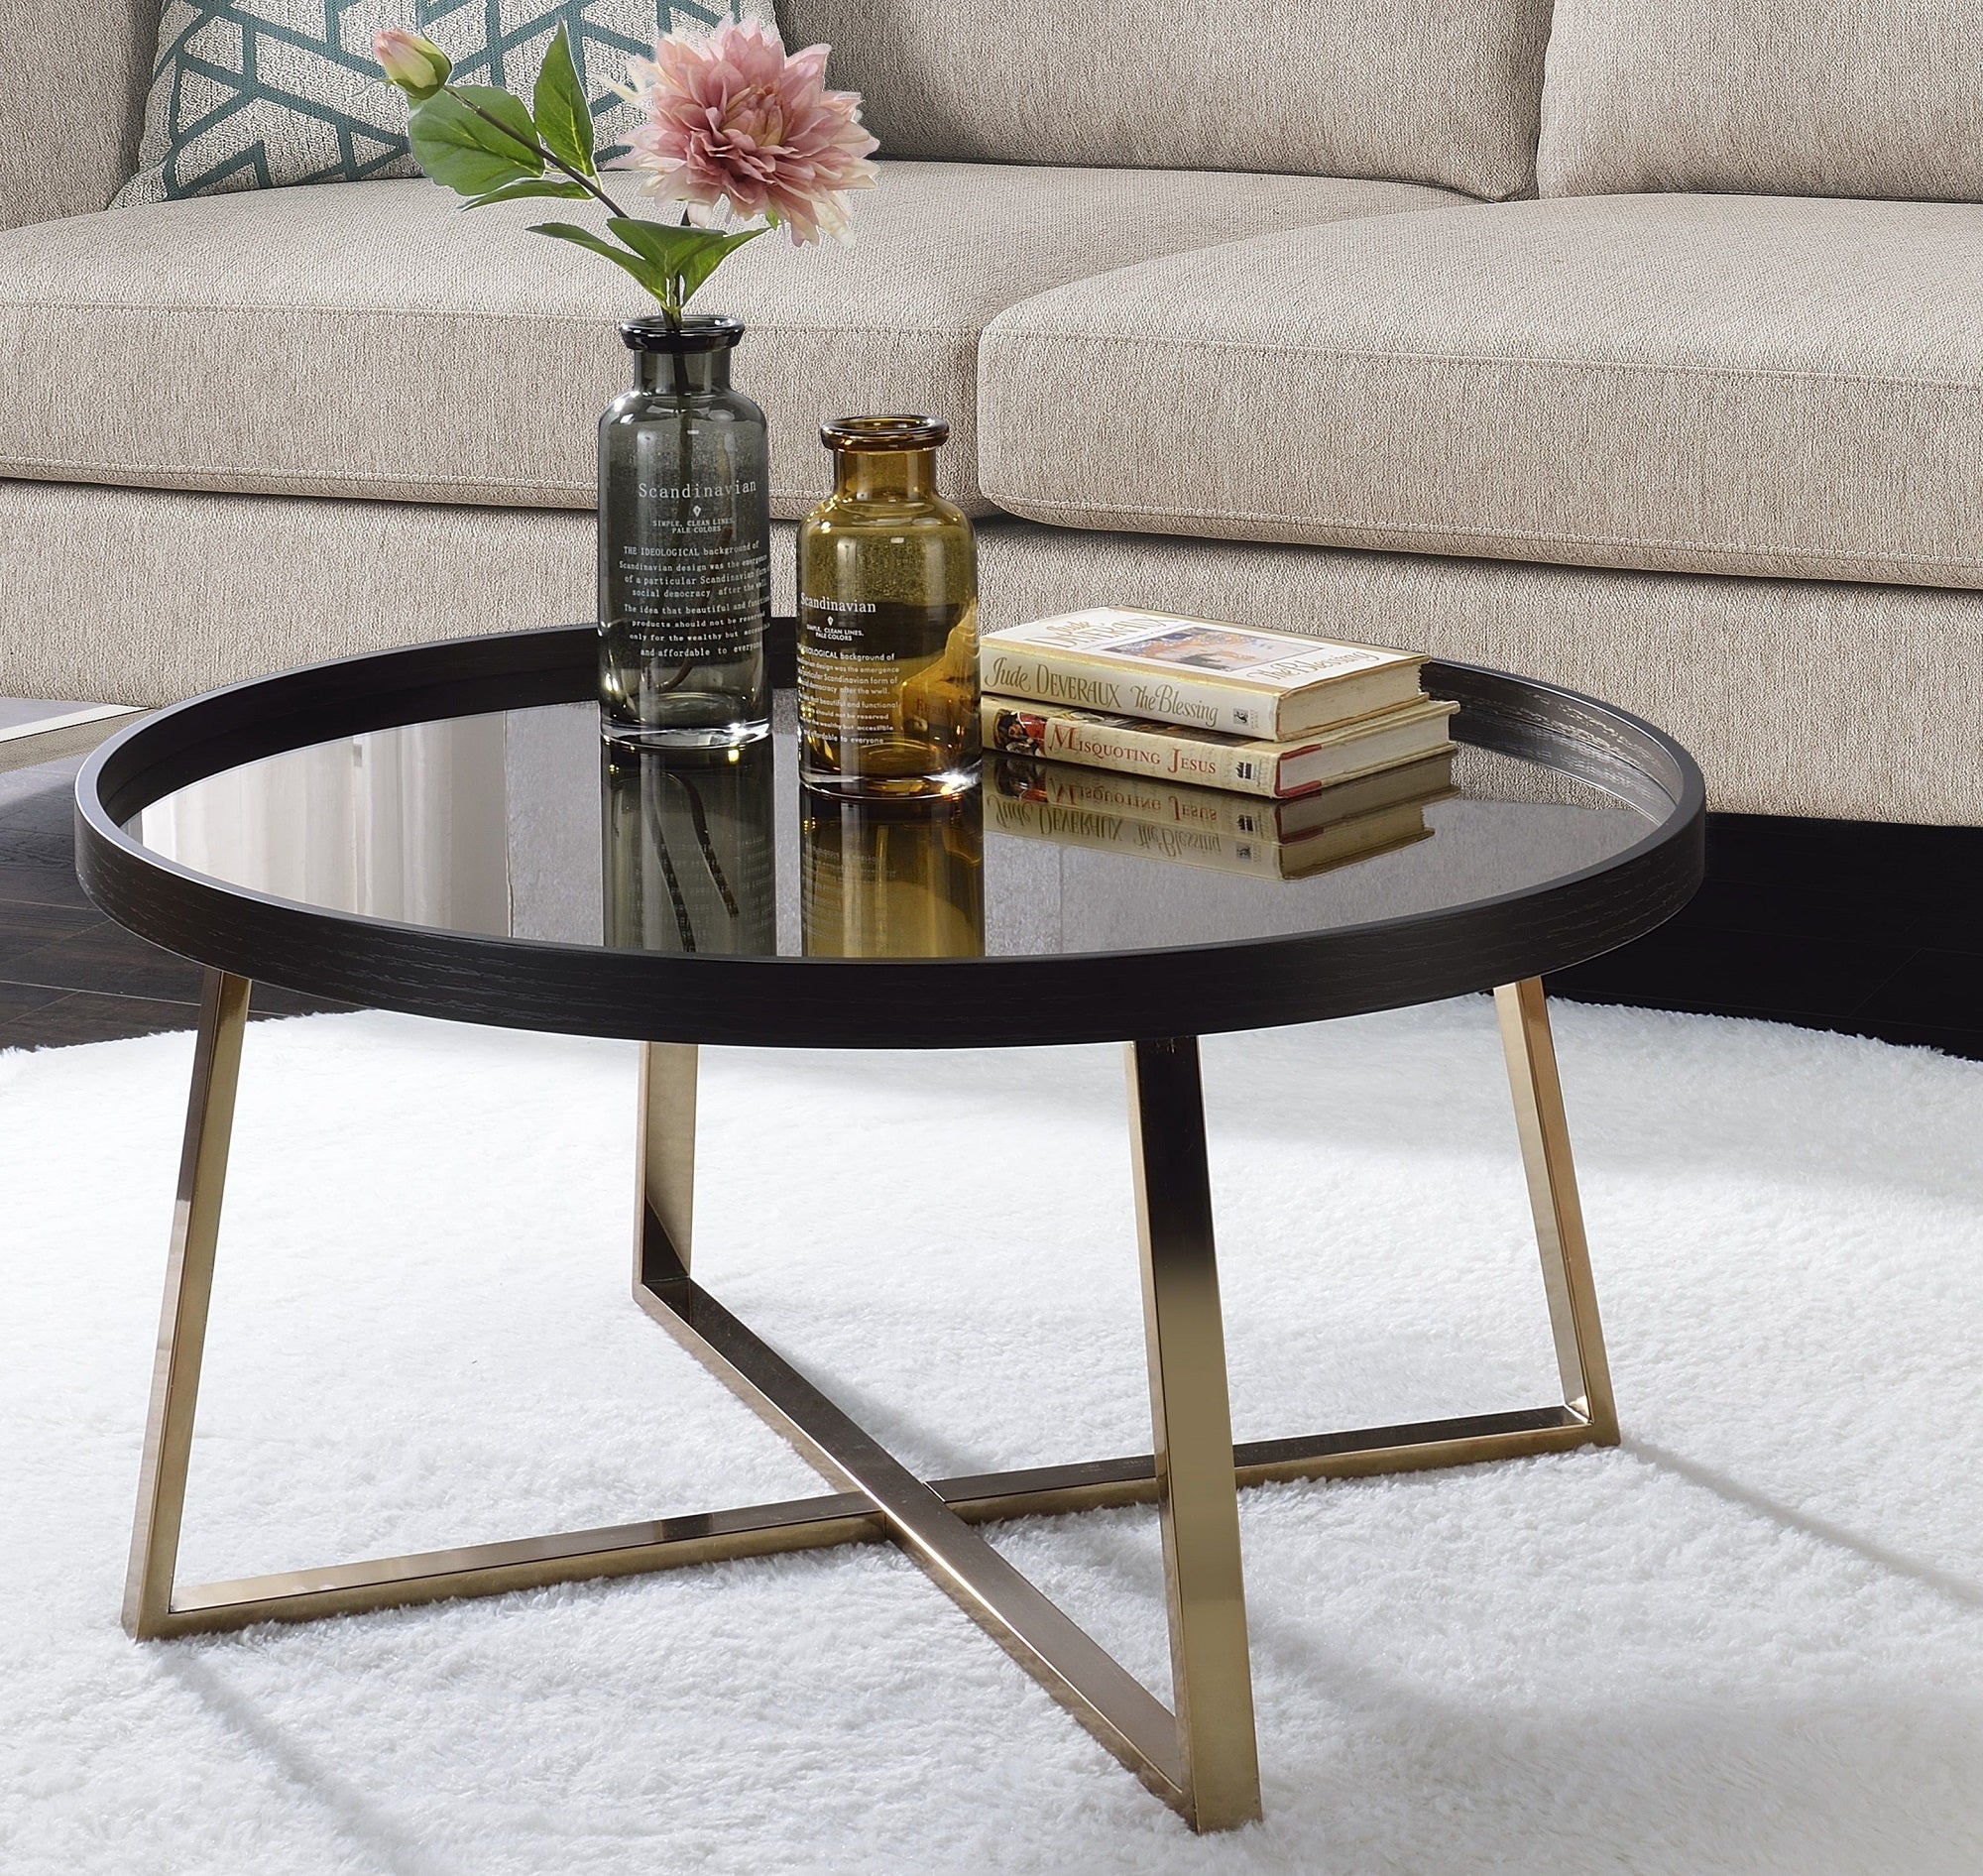 Walnut & Champagne Hepton Mirrored Coffee Table